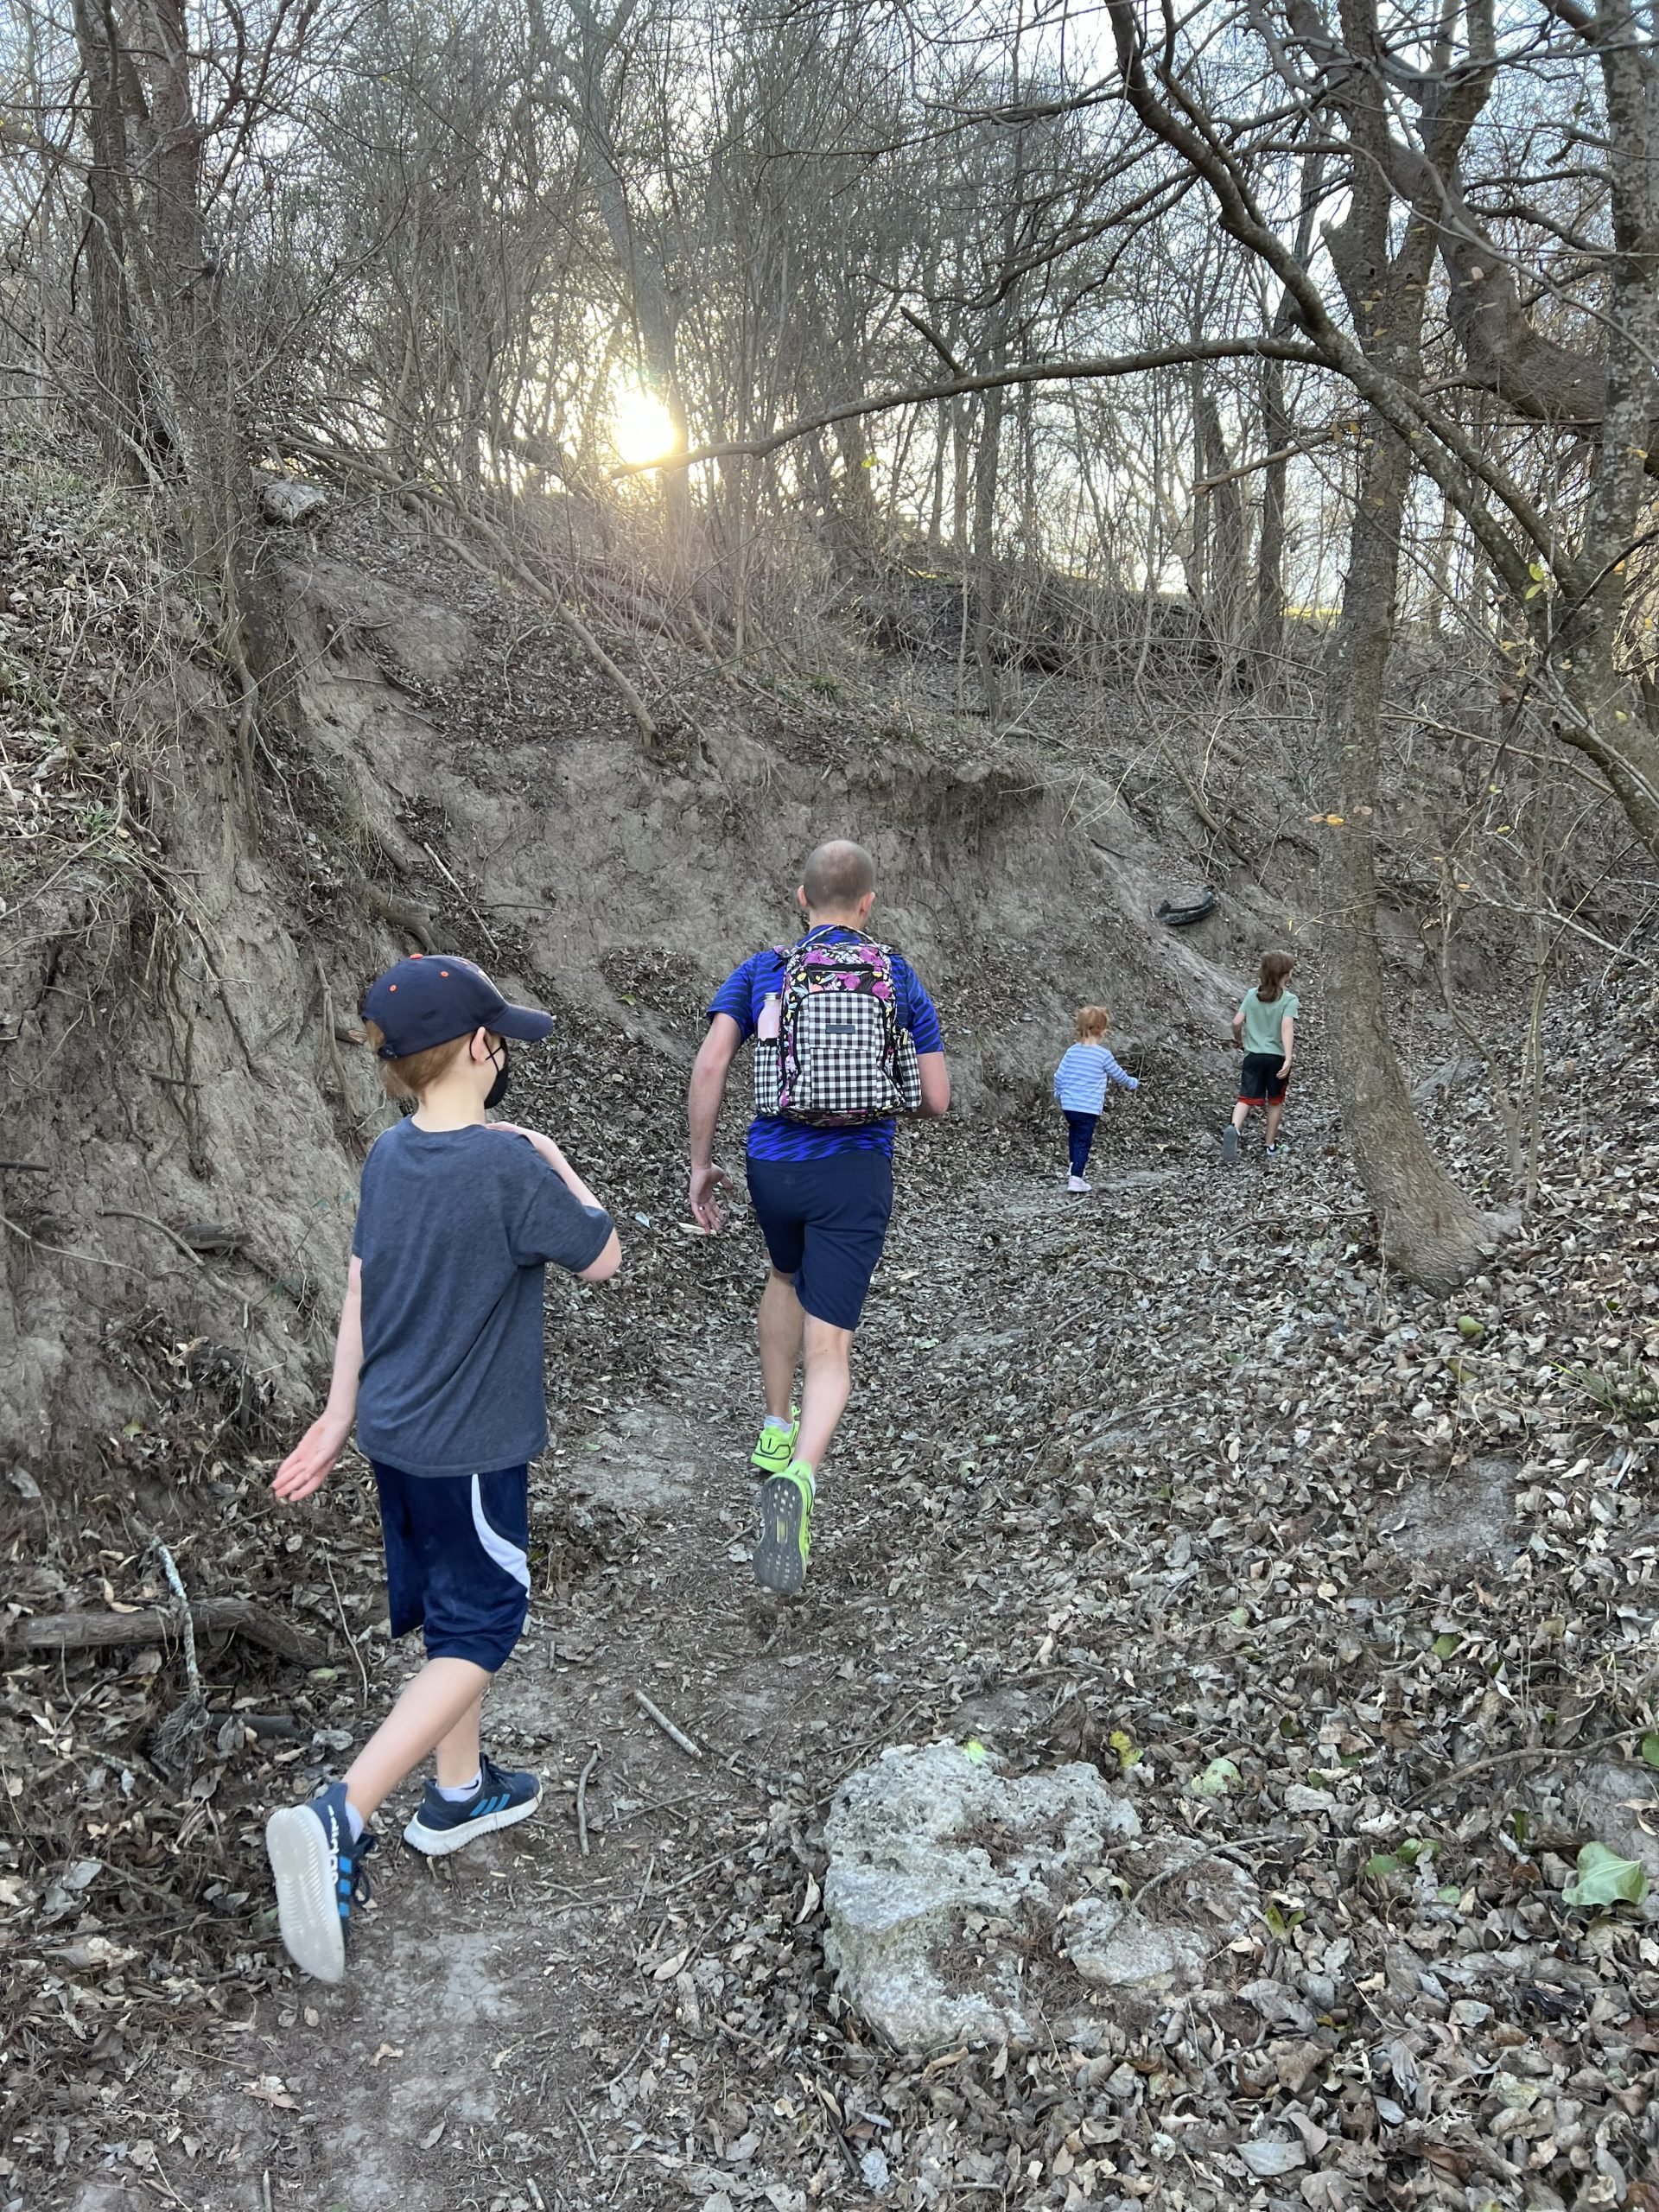 An adult and 3 kids walking through a rugged trail